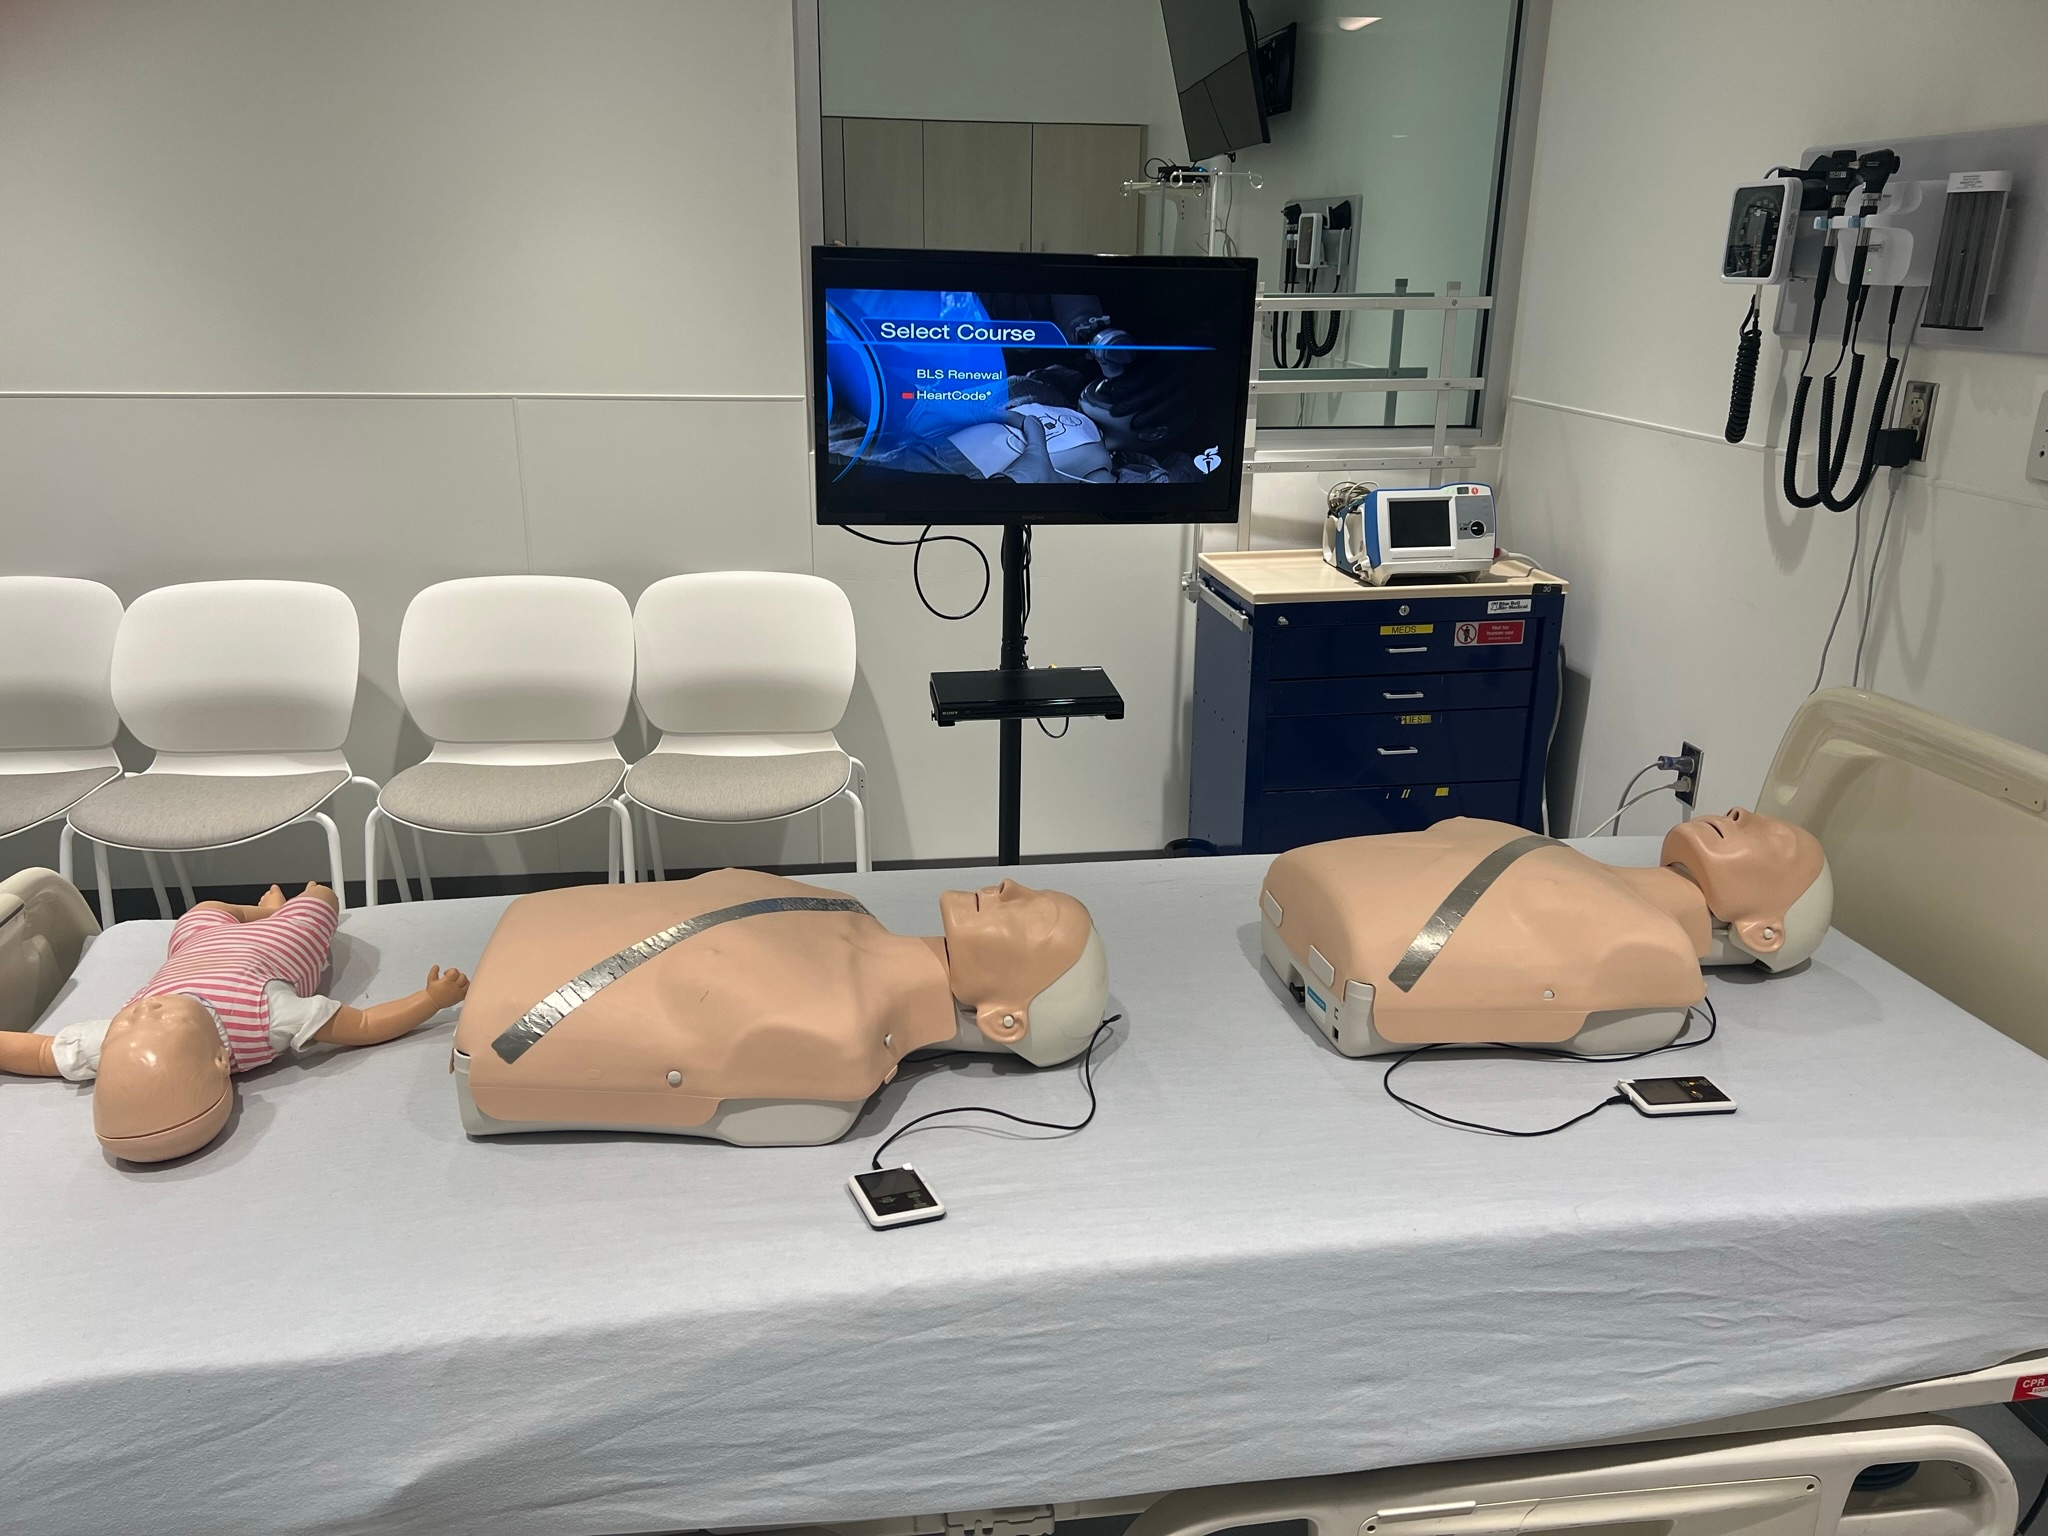 Clinical simulation with a scope